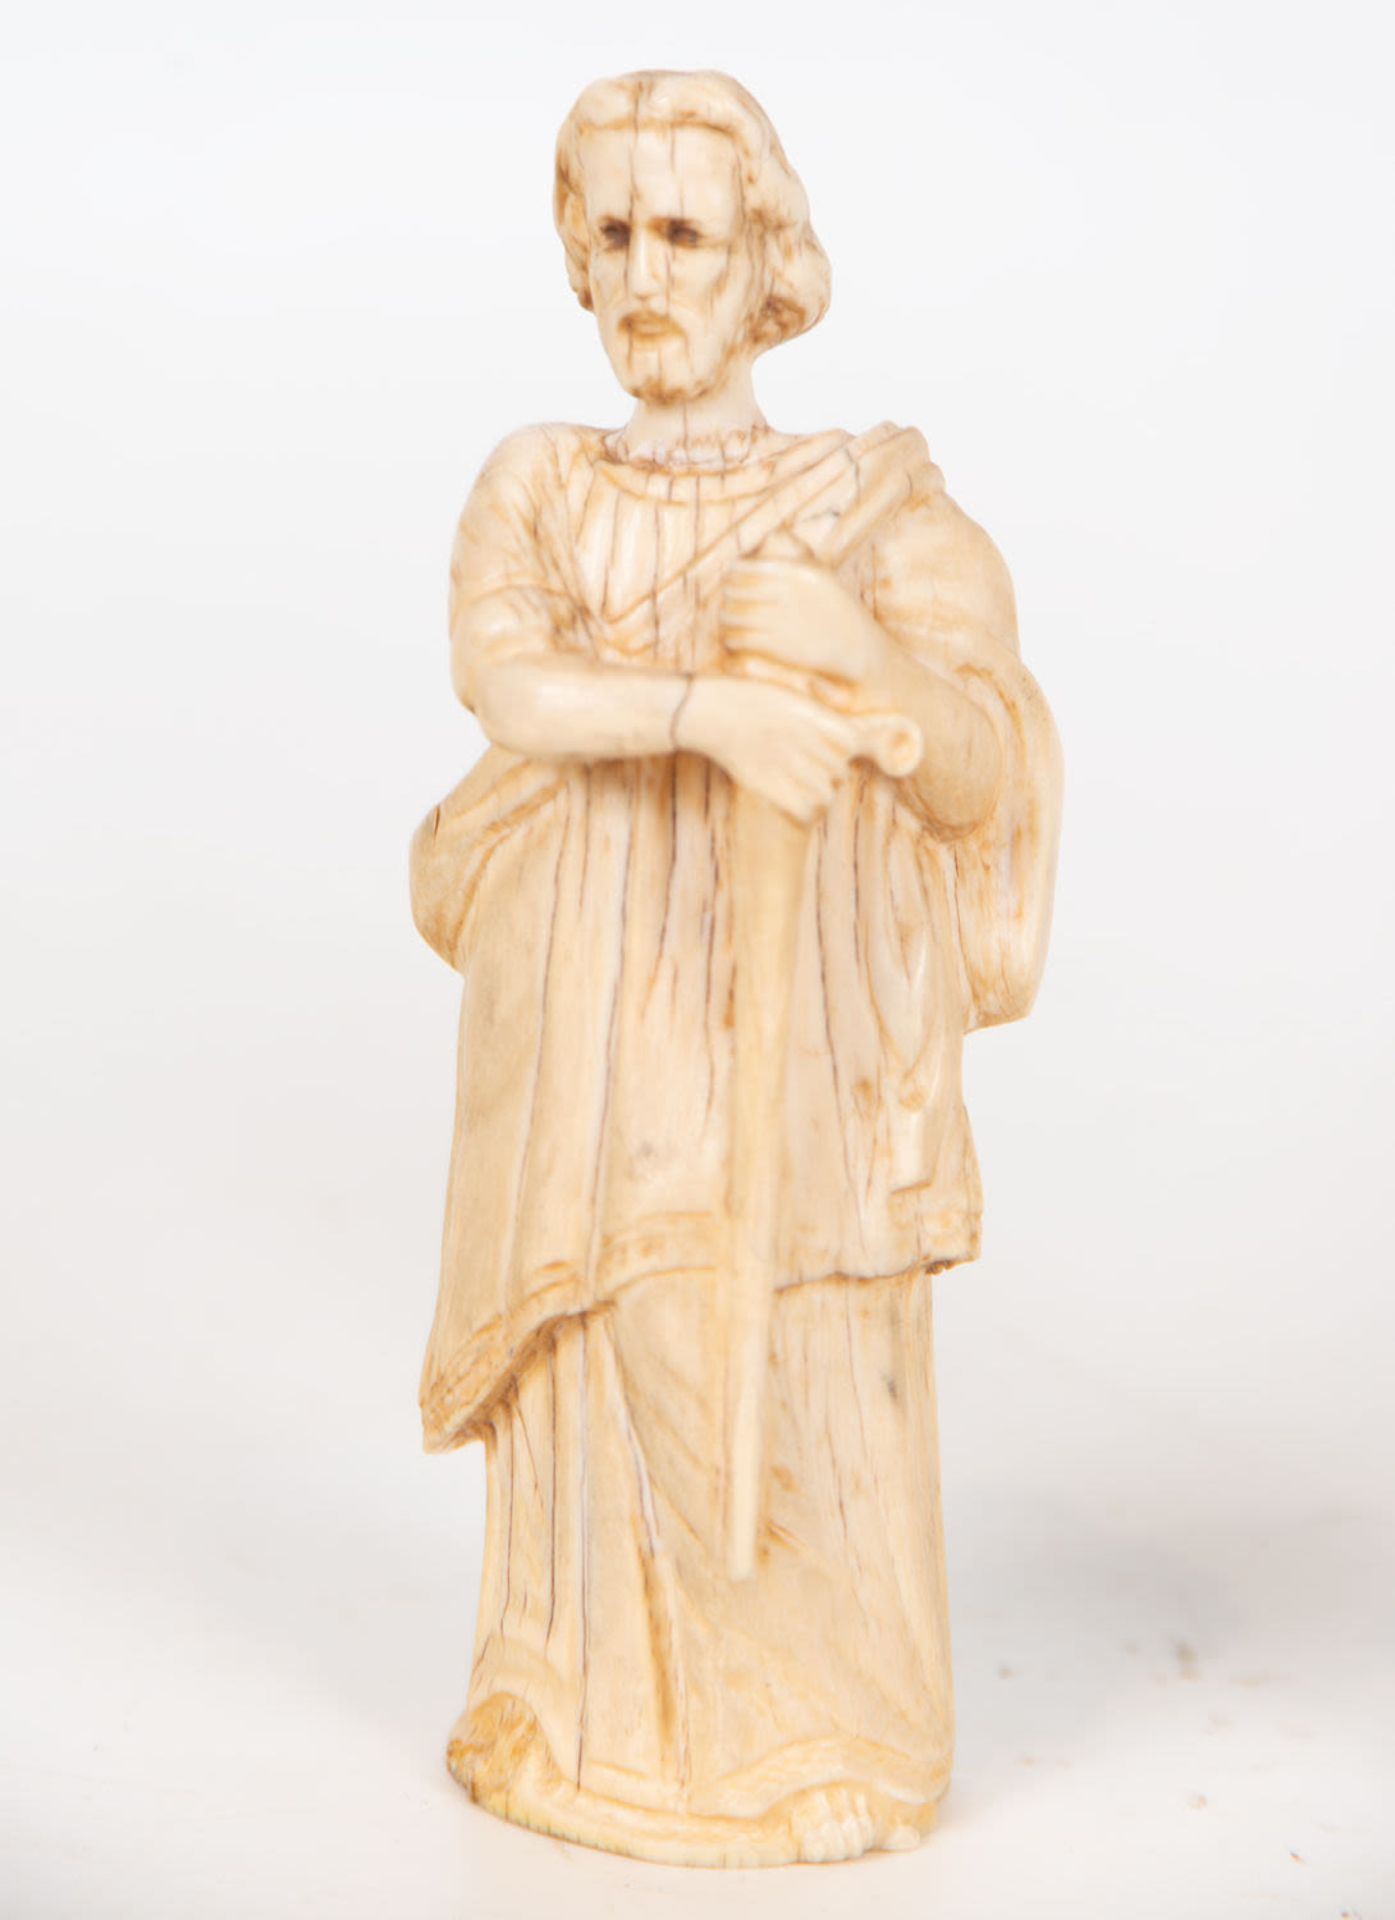 Saint Peter and Saint Paul in Ivory, Central European School, 17th century - Image 3 of 8